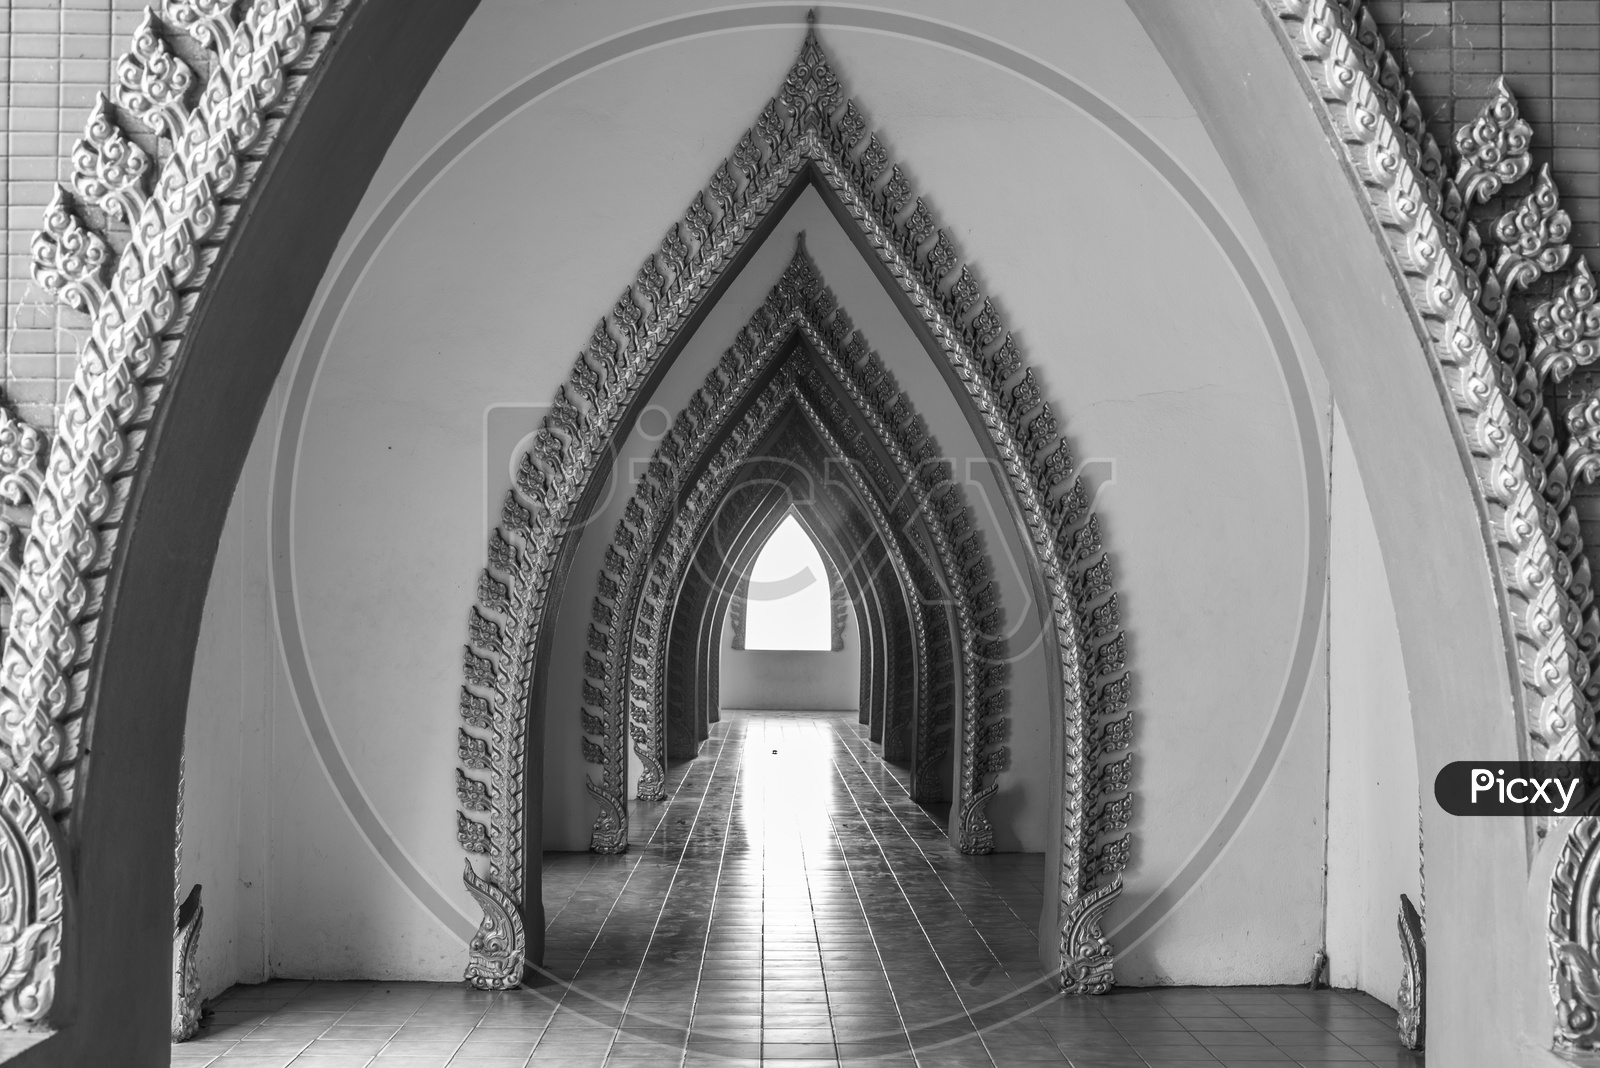 Architecture Of Thai Temple door With B&W Filter